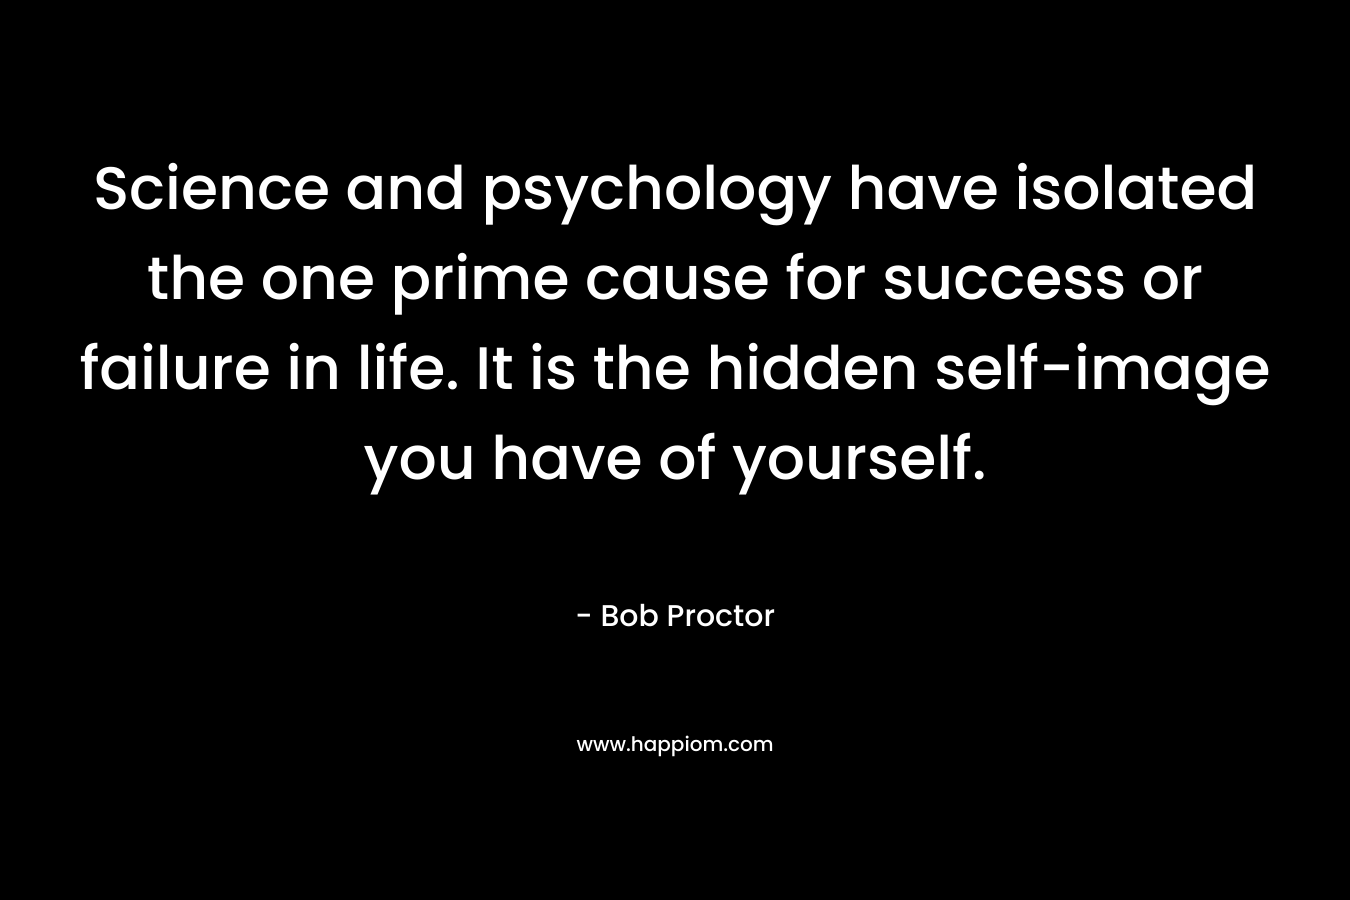 Science and psychology have isolated the one prime cause for success or failure in life. It is the hidden self-image you have of yourself. – Bob Proctor